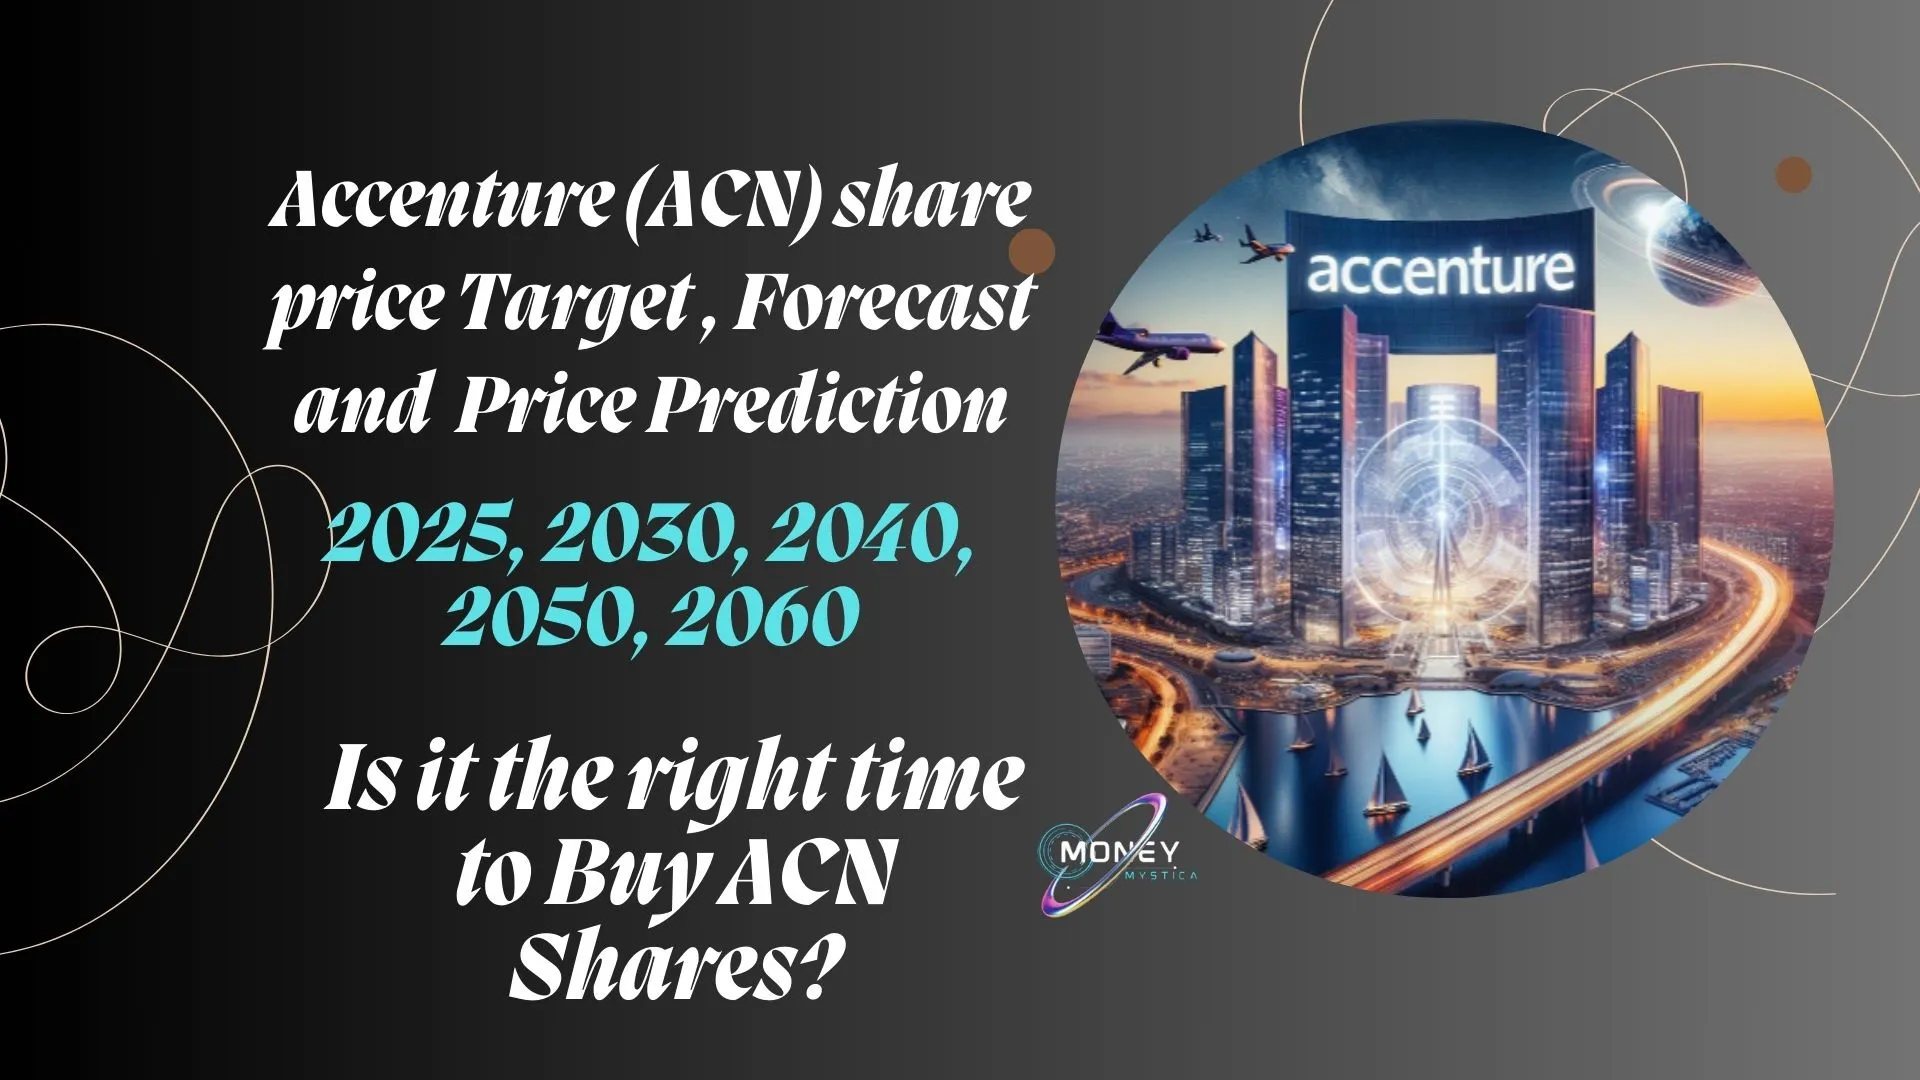 ACN Share price target, forecast and price prediction